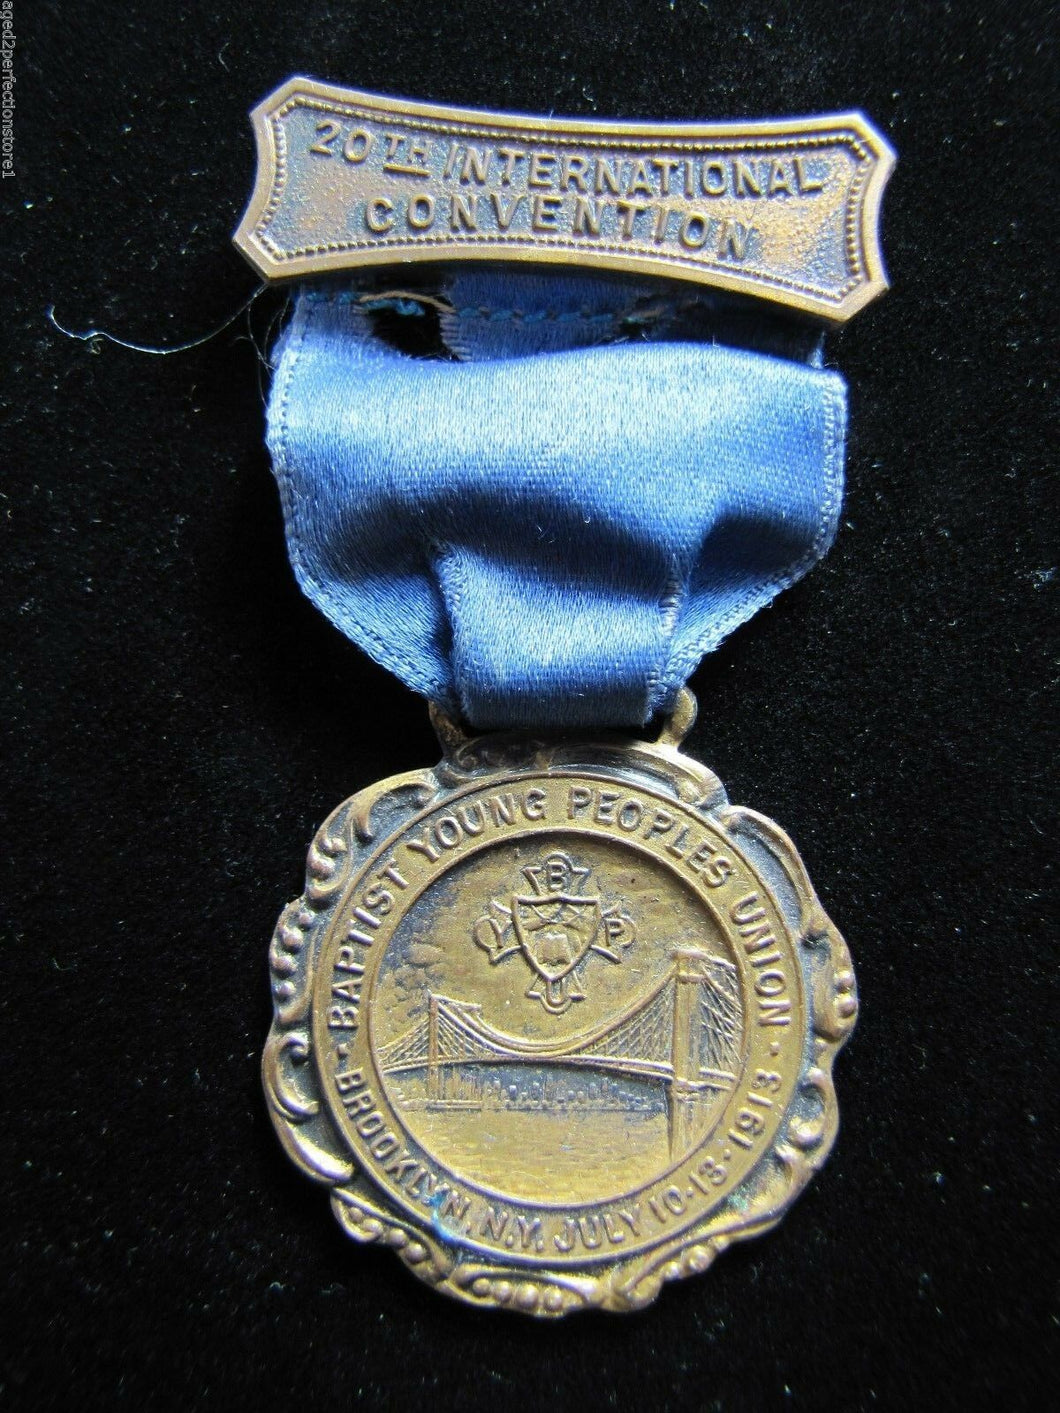 1913 BAPTIST YOUNG PEOPLES UNION Medallion BROOKLYN NY Int Convention W&H Nwk